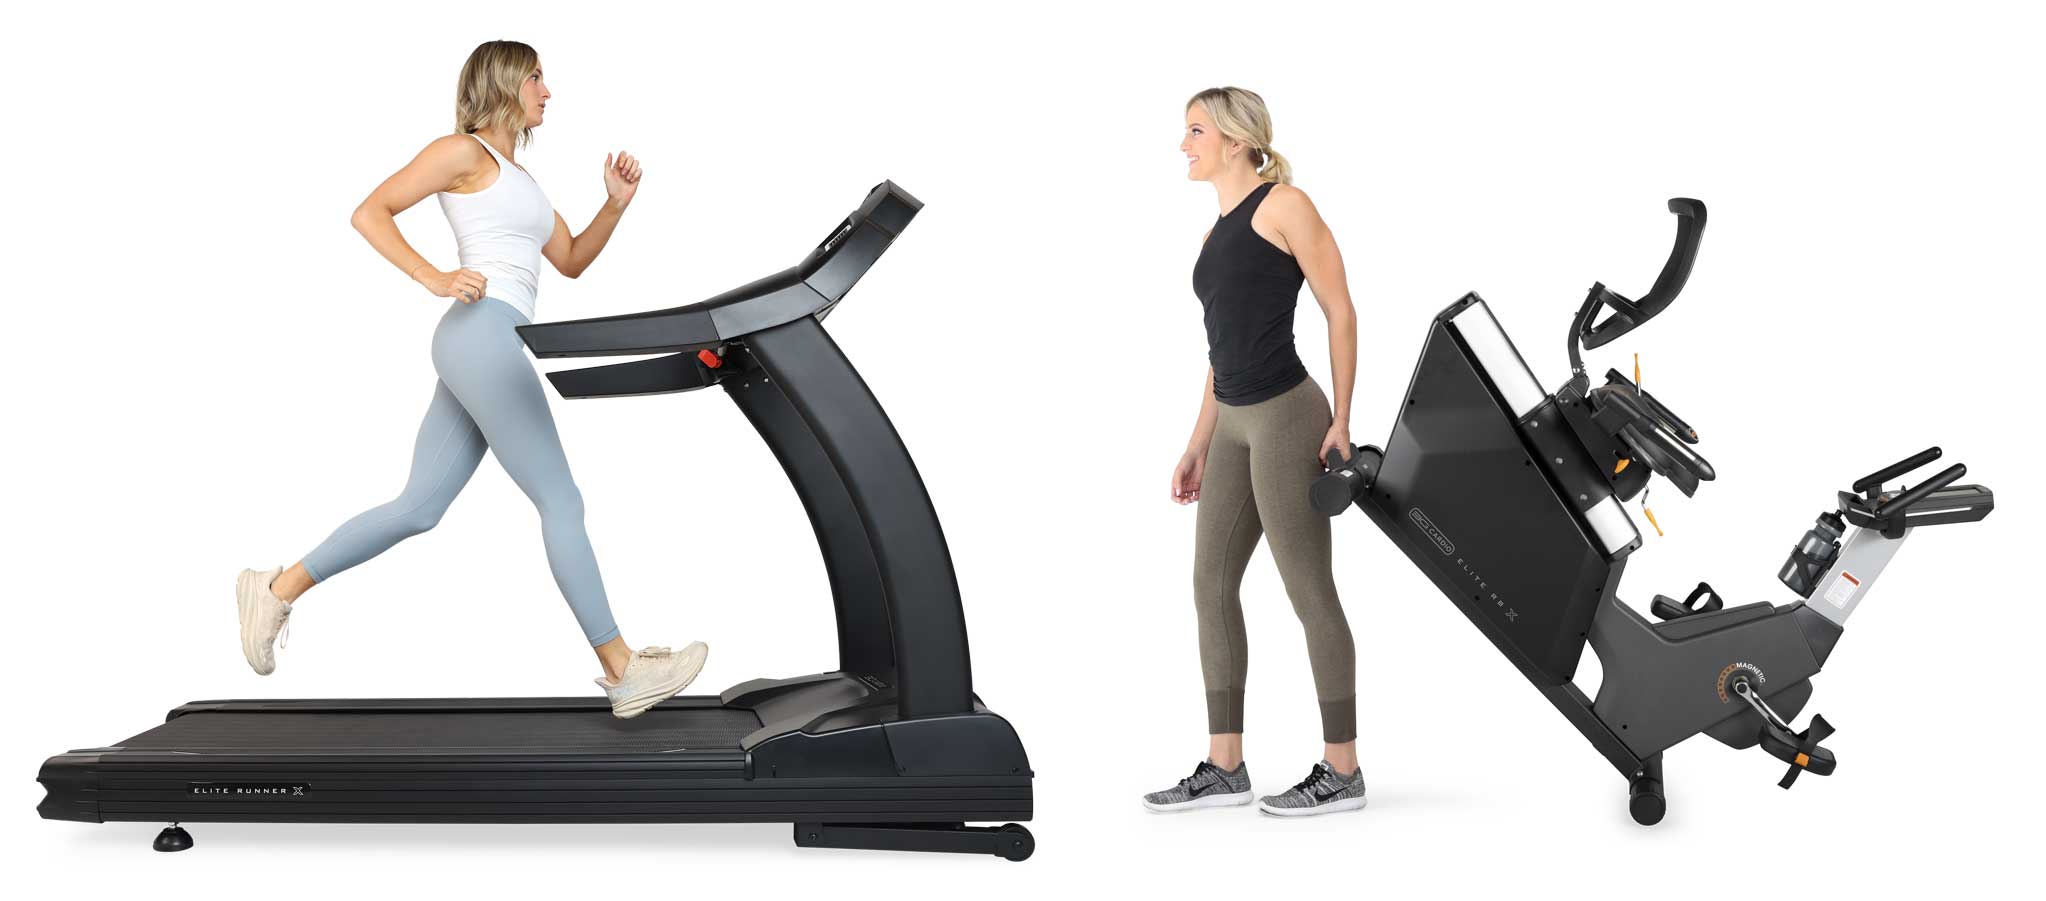 Register Your 3G Cardio Fitness Equipment - Treadmills, Exercise Bikes and more